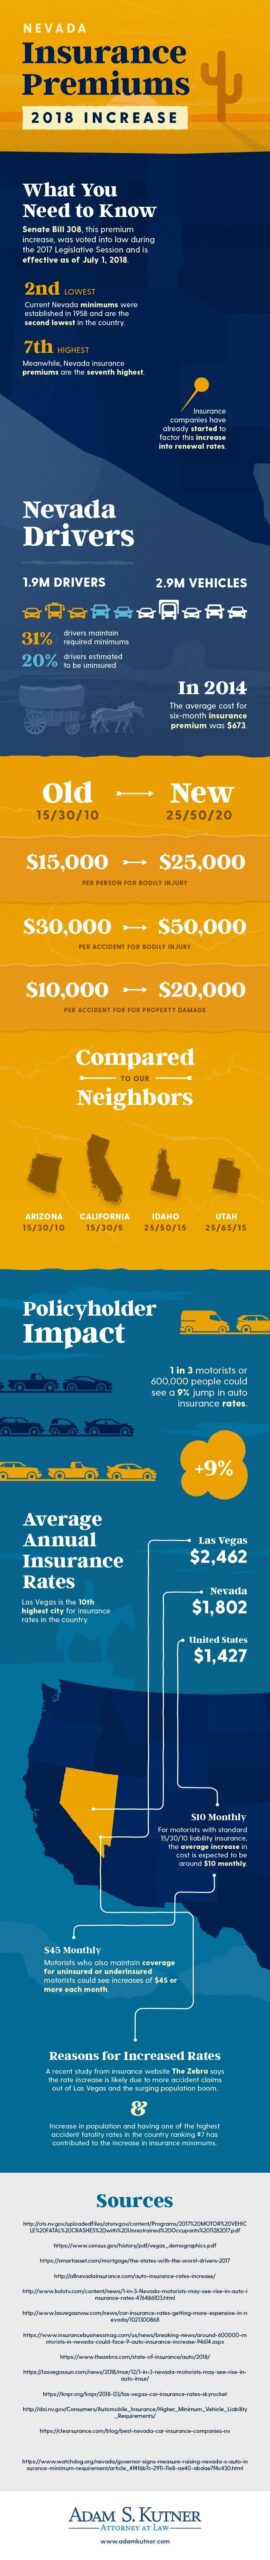 nevada-increase-in-insurance-premiums-infographic-1